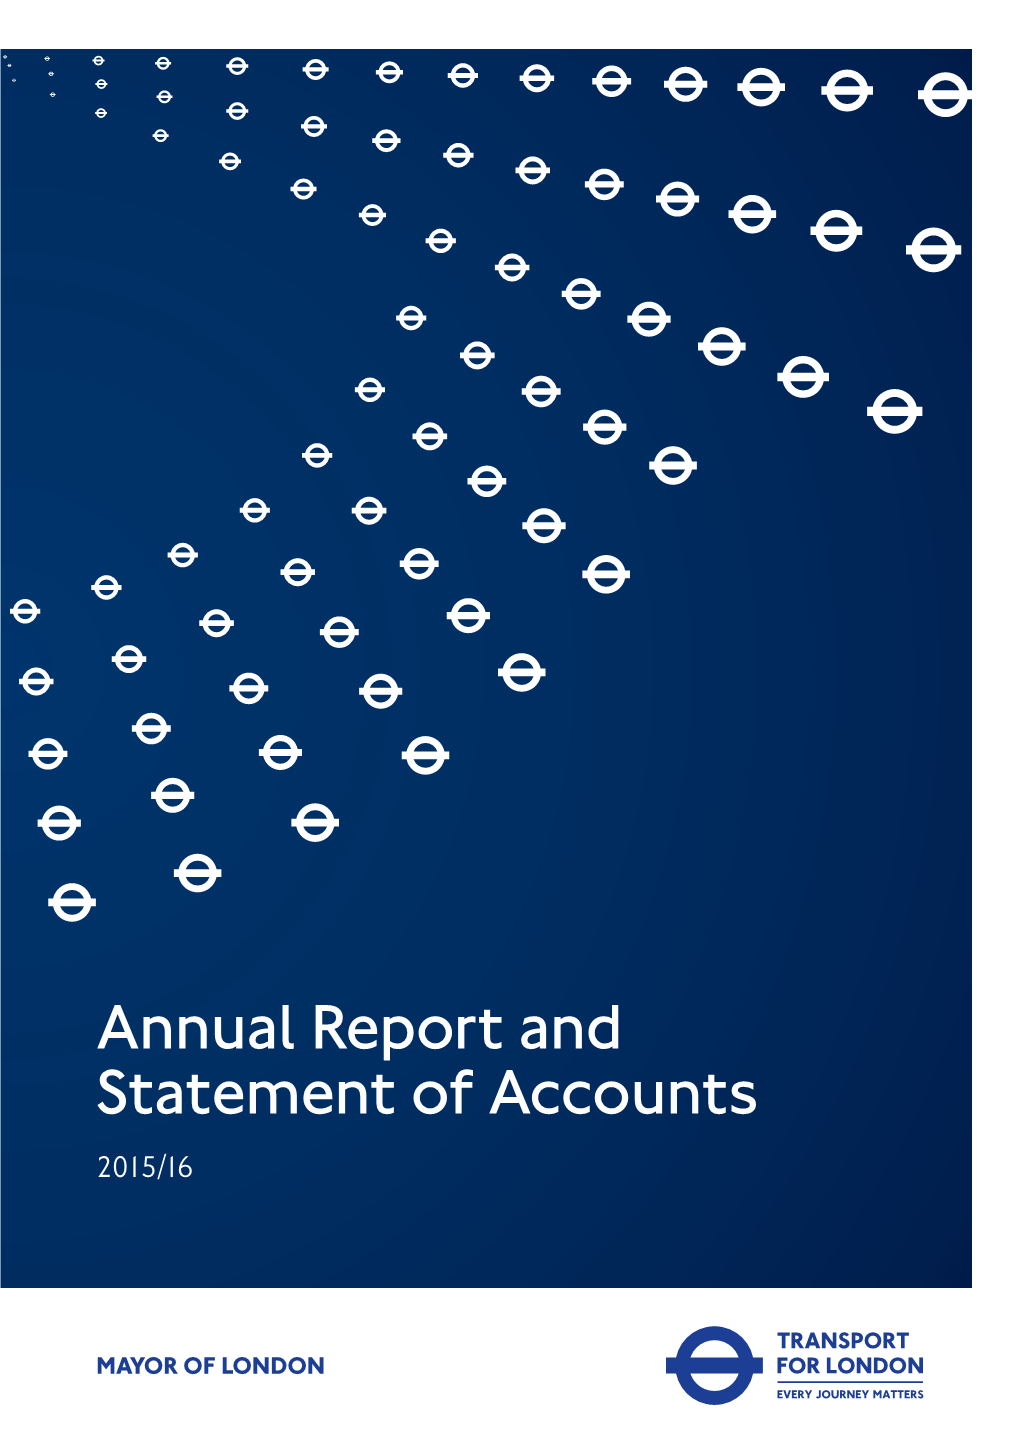 Annual Report and Statement of Accounts 2015/16 Contents